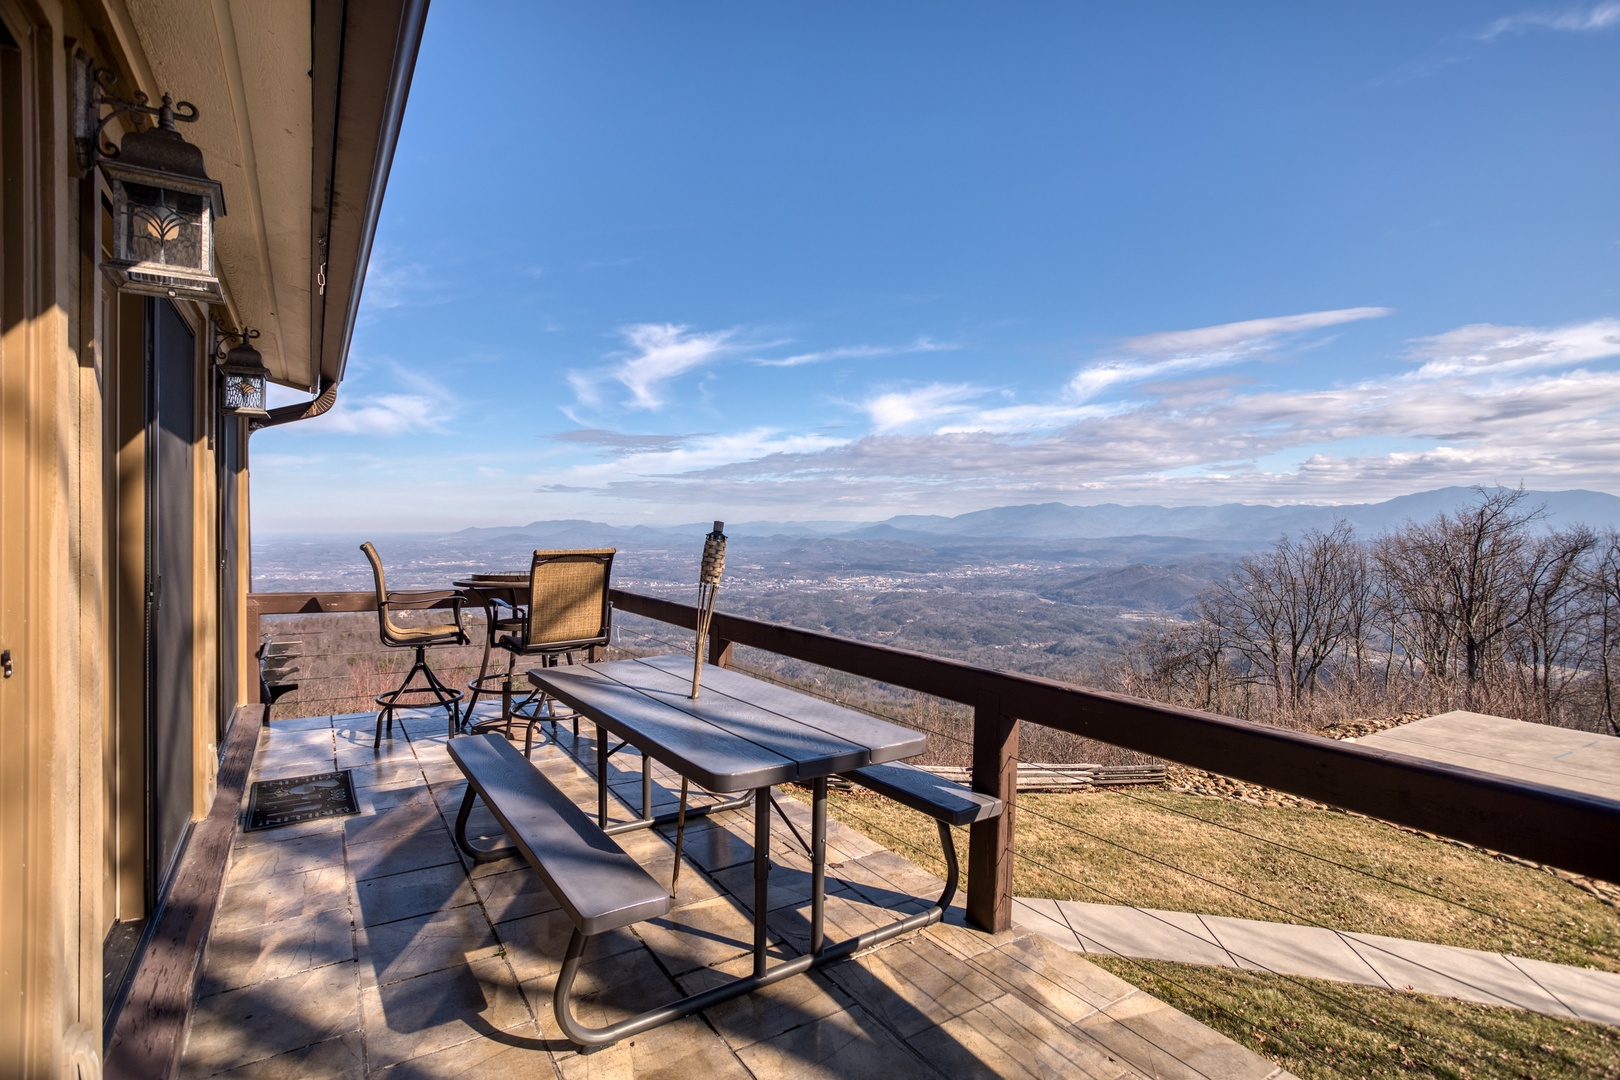 Deck dining at Best View Ever! A 5 bedroom cabin rental in Pigeon Forge